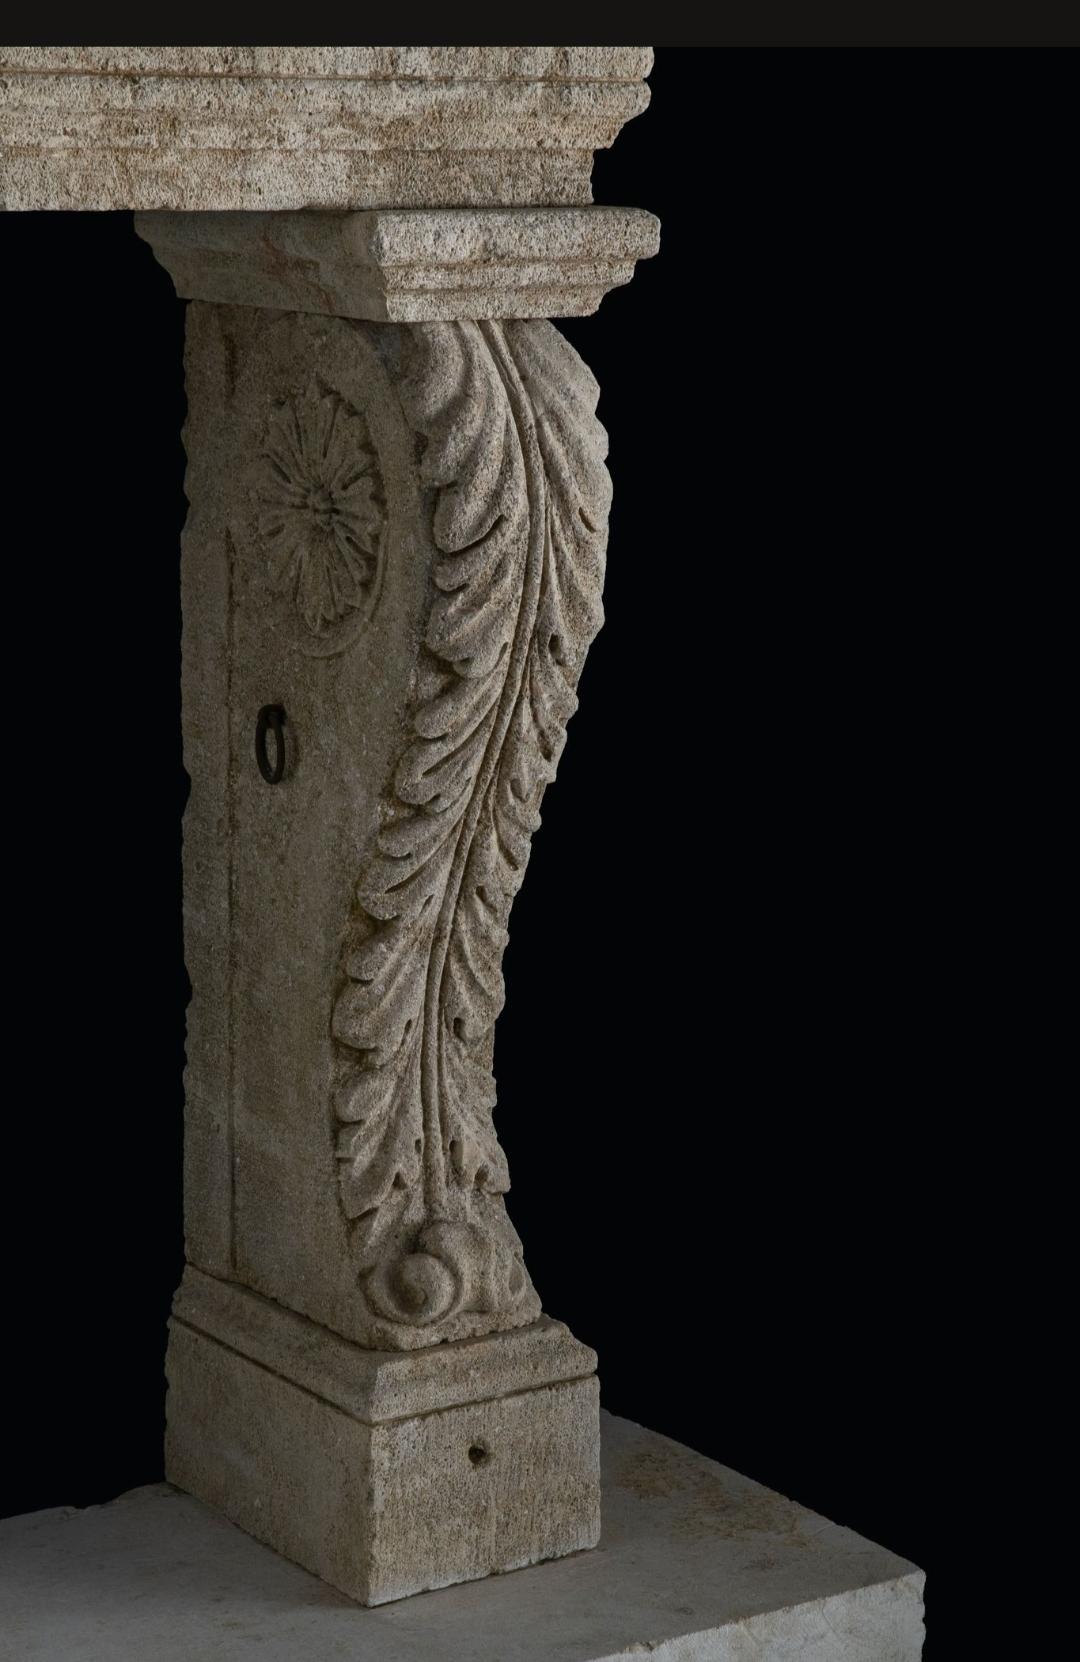 This limestone mantel is one of twelve fireplace mantels that we've recently acquired from a chateau-like mansion in Italy. 

All twelve rare mantels were intricately hand carved by Italian master carvers and installed on site anywhere between